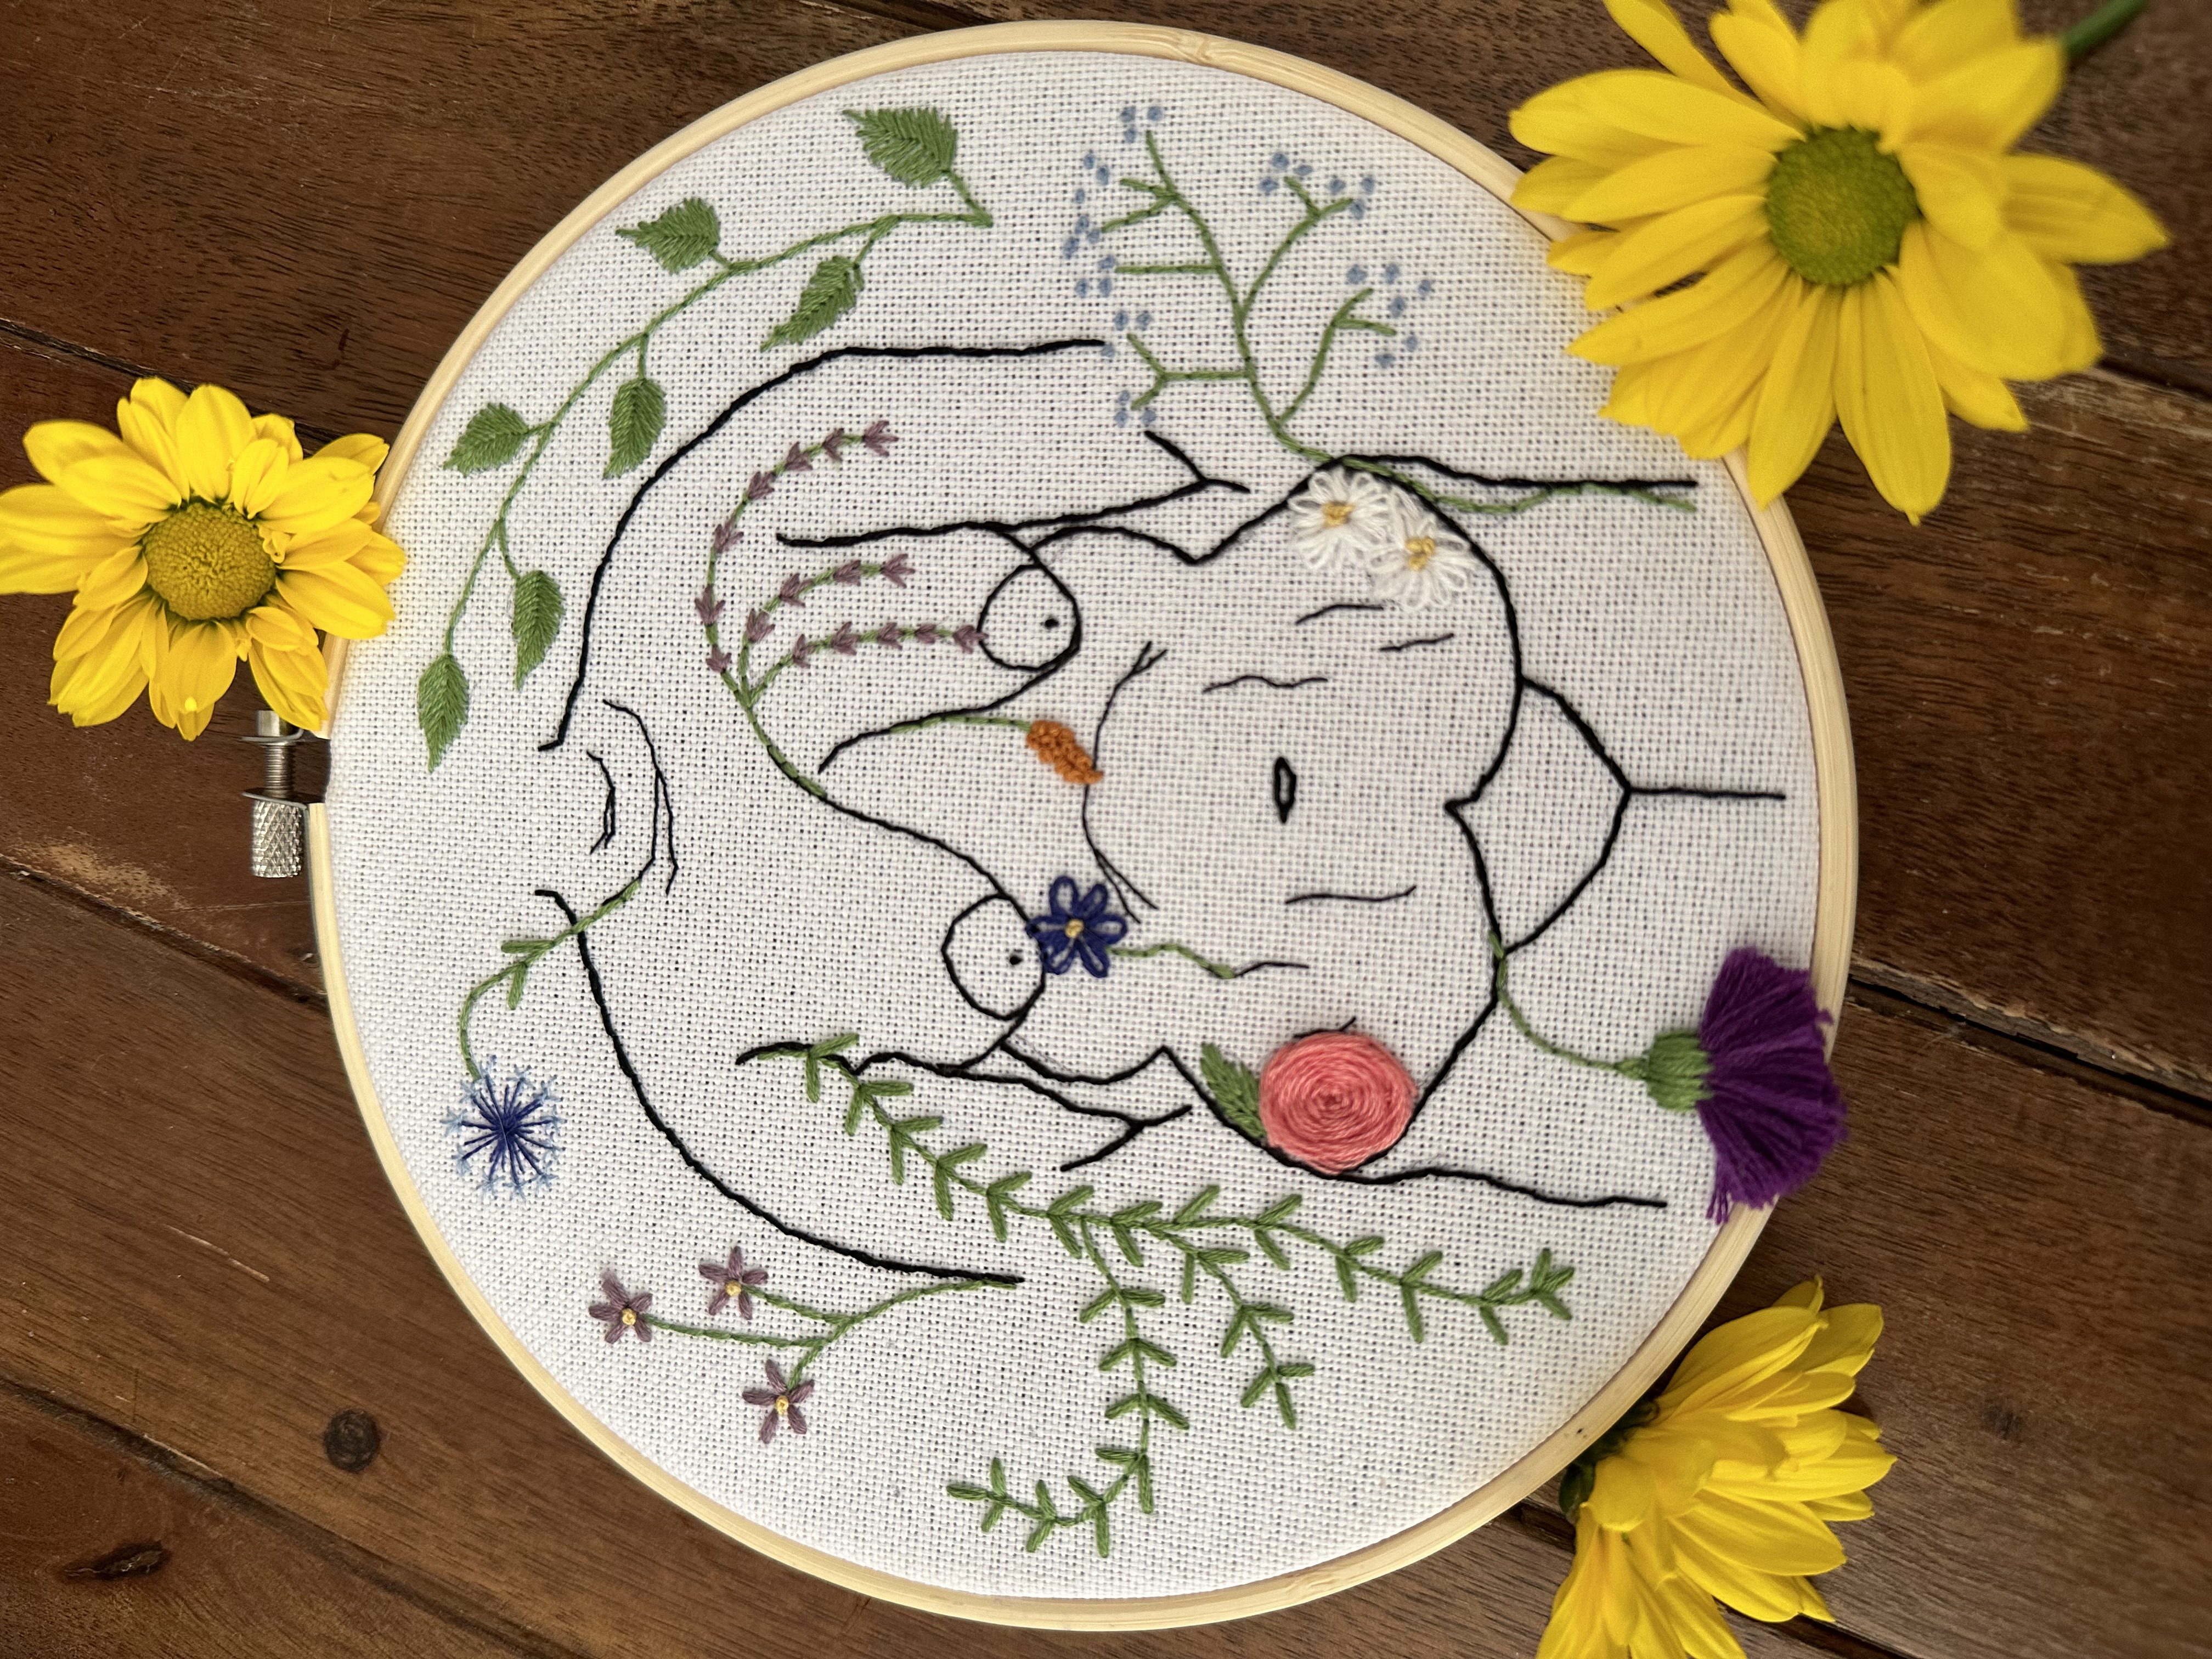 embroidery loop with embroidered naked female body from neck to hips with flowers and leaves around it and yellow flowers around the outside of the loop